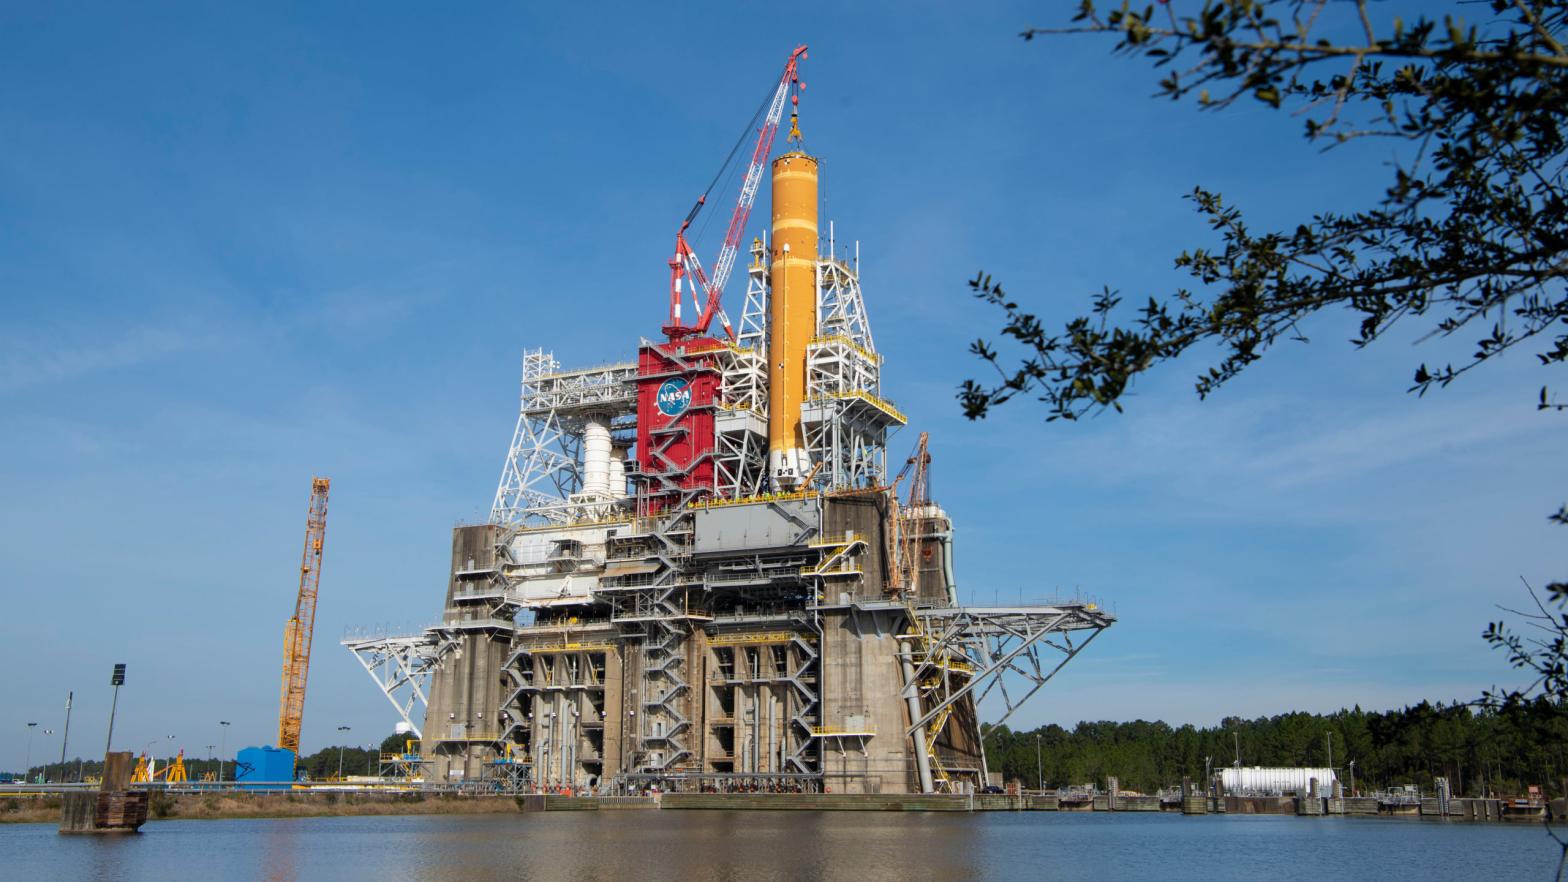 The core stage of NASA's Space Launch System (SLS) in the B-2 Test Stand at NASA's Stennis Space Centre near Bay St. Louis, Mississippi. (Image: NASA)